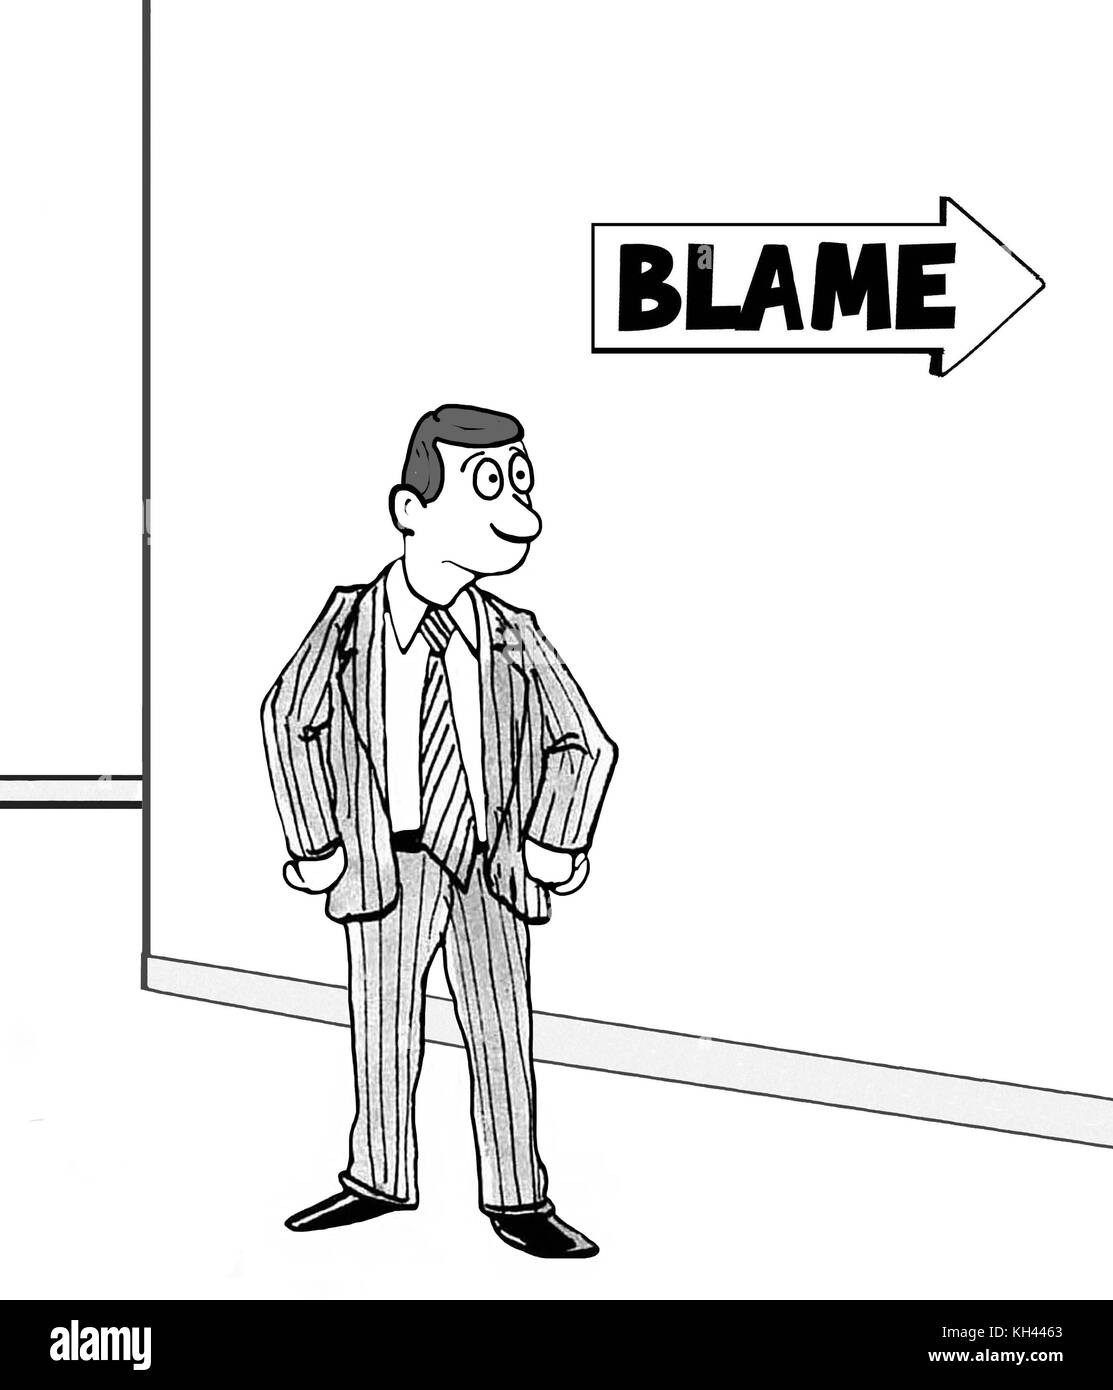 Business cartoon illustration showing a business man starting to head down the 'blame' hallway. Stock Photo